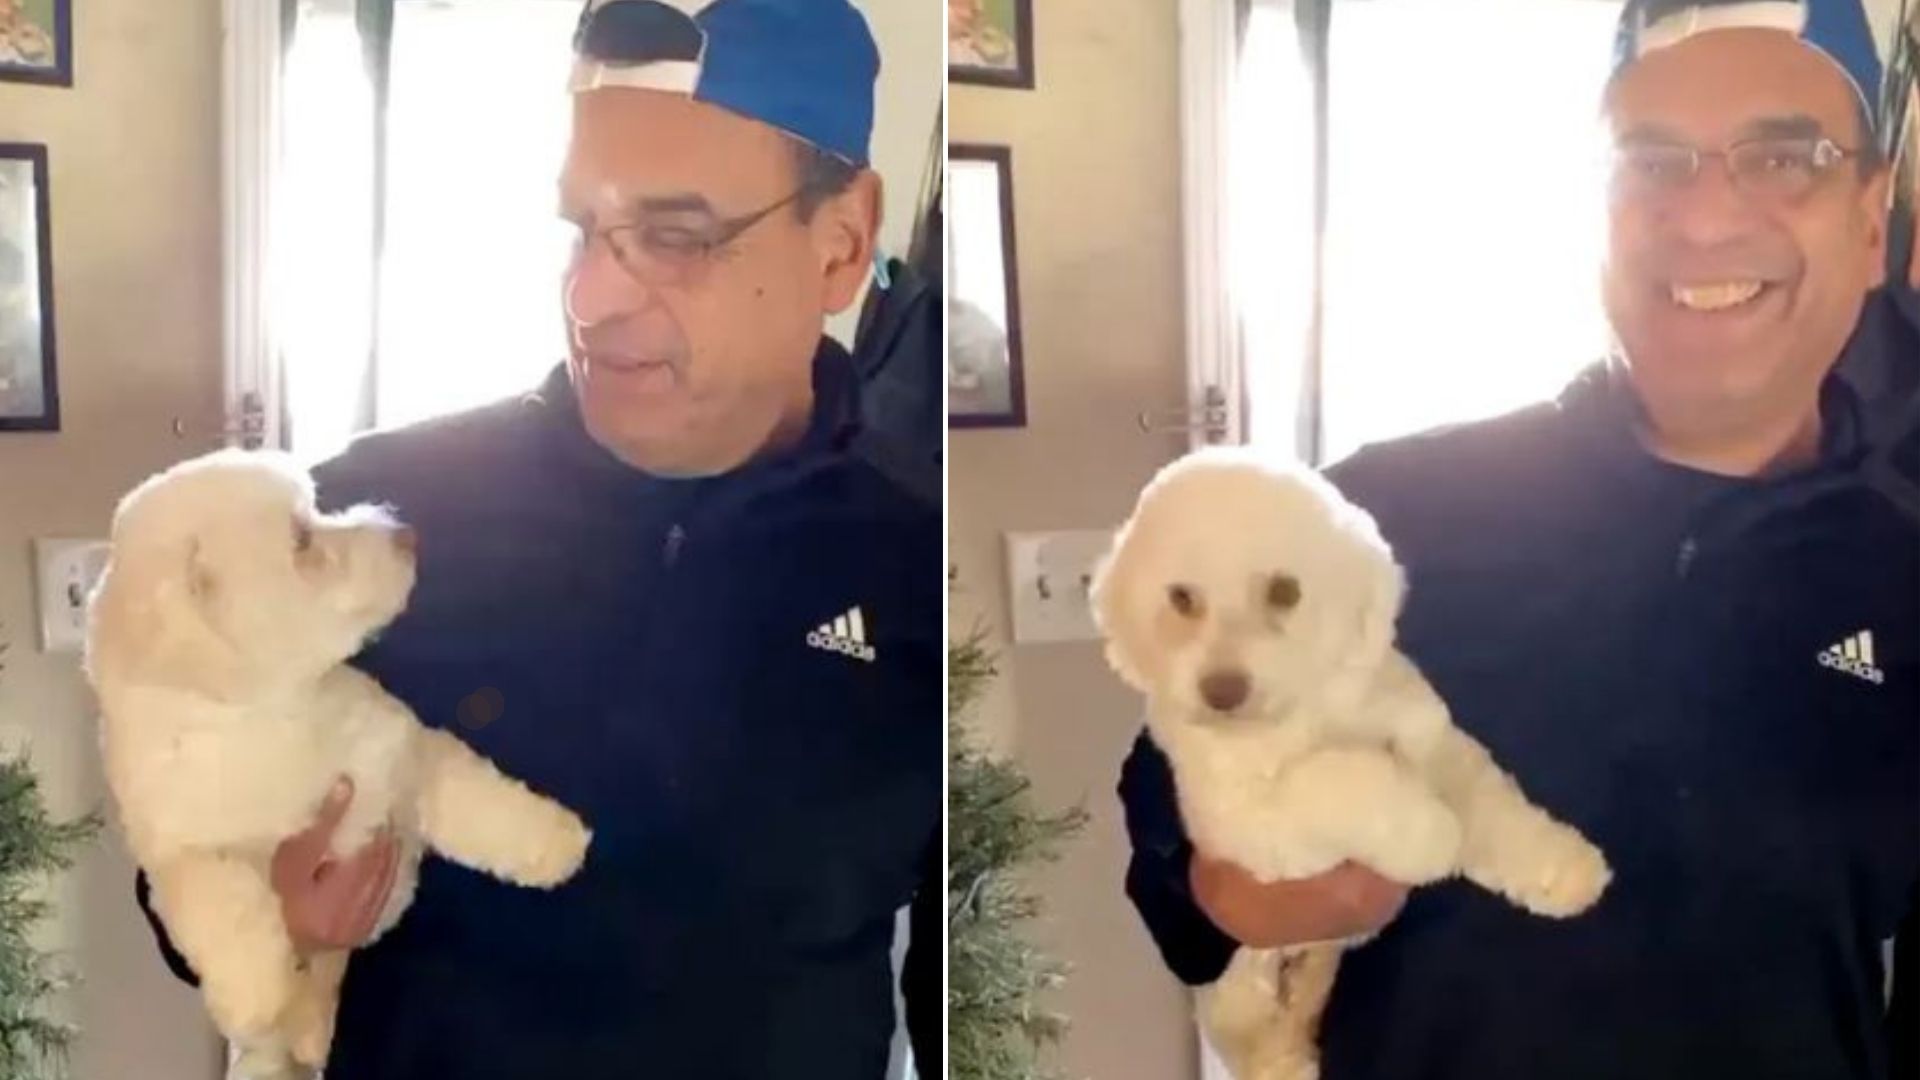 Witness This Hilarious Moment Where A Dad Mistakenly Brought The Wrong Dog From A Groomer